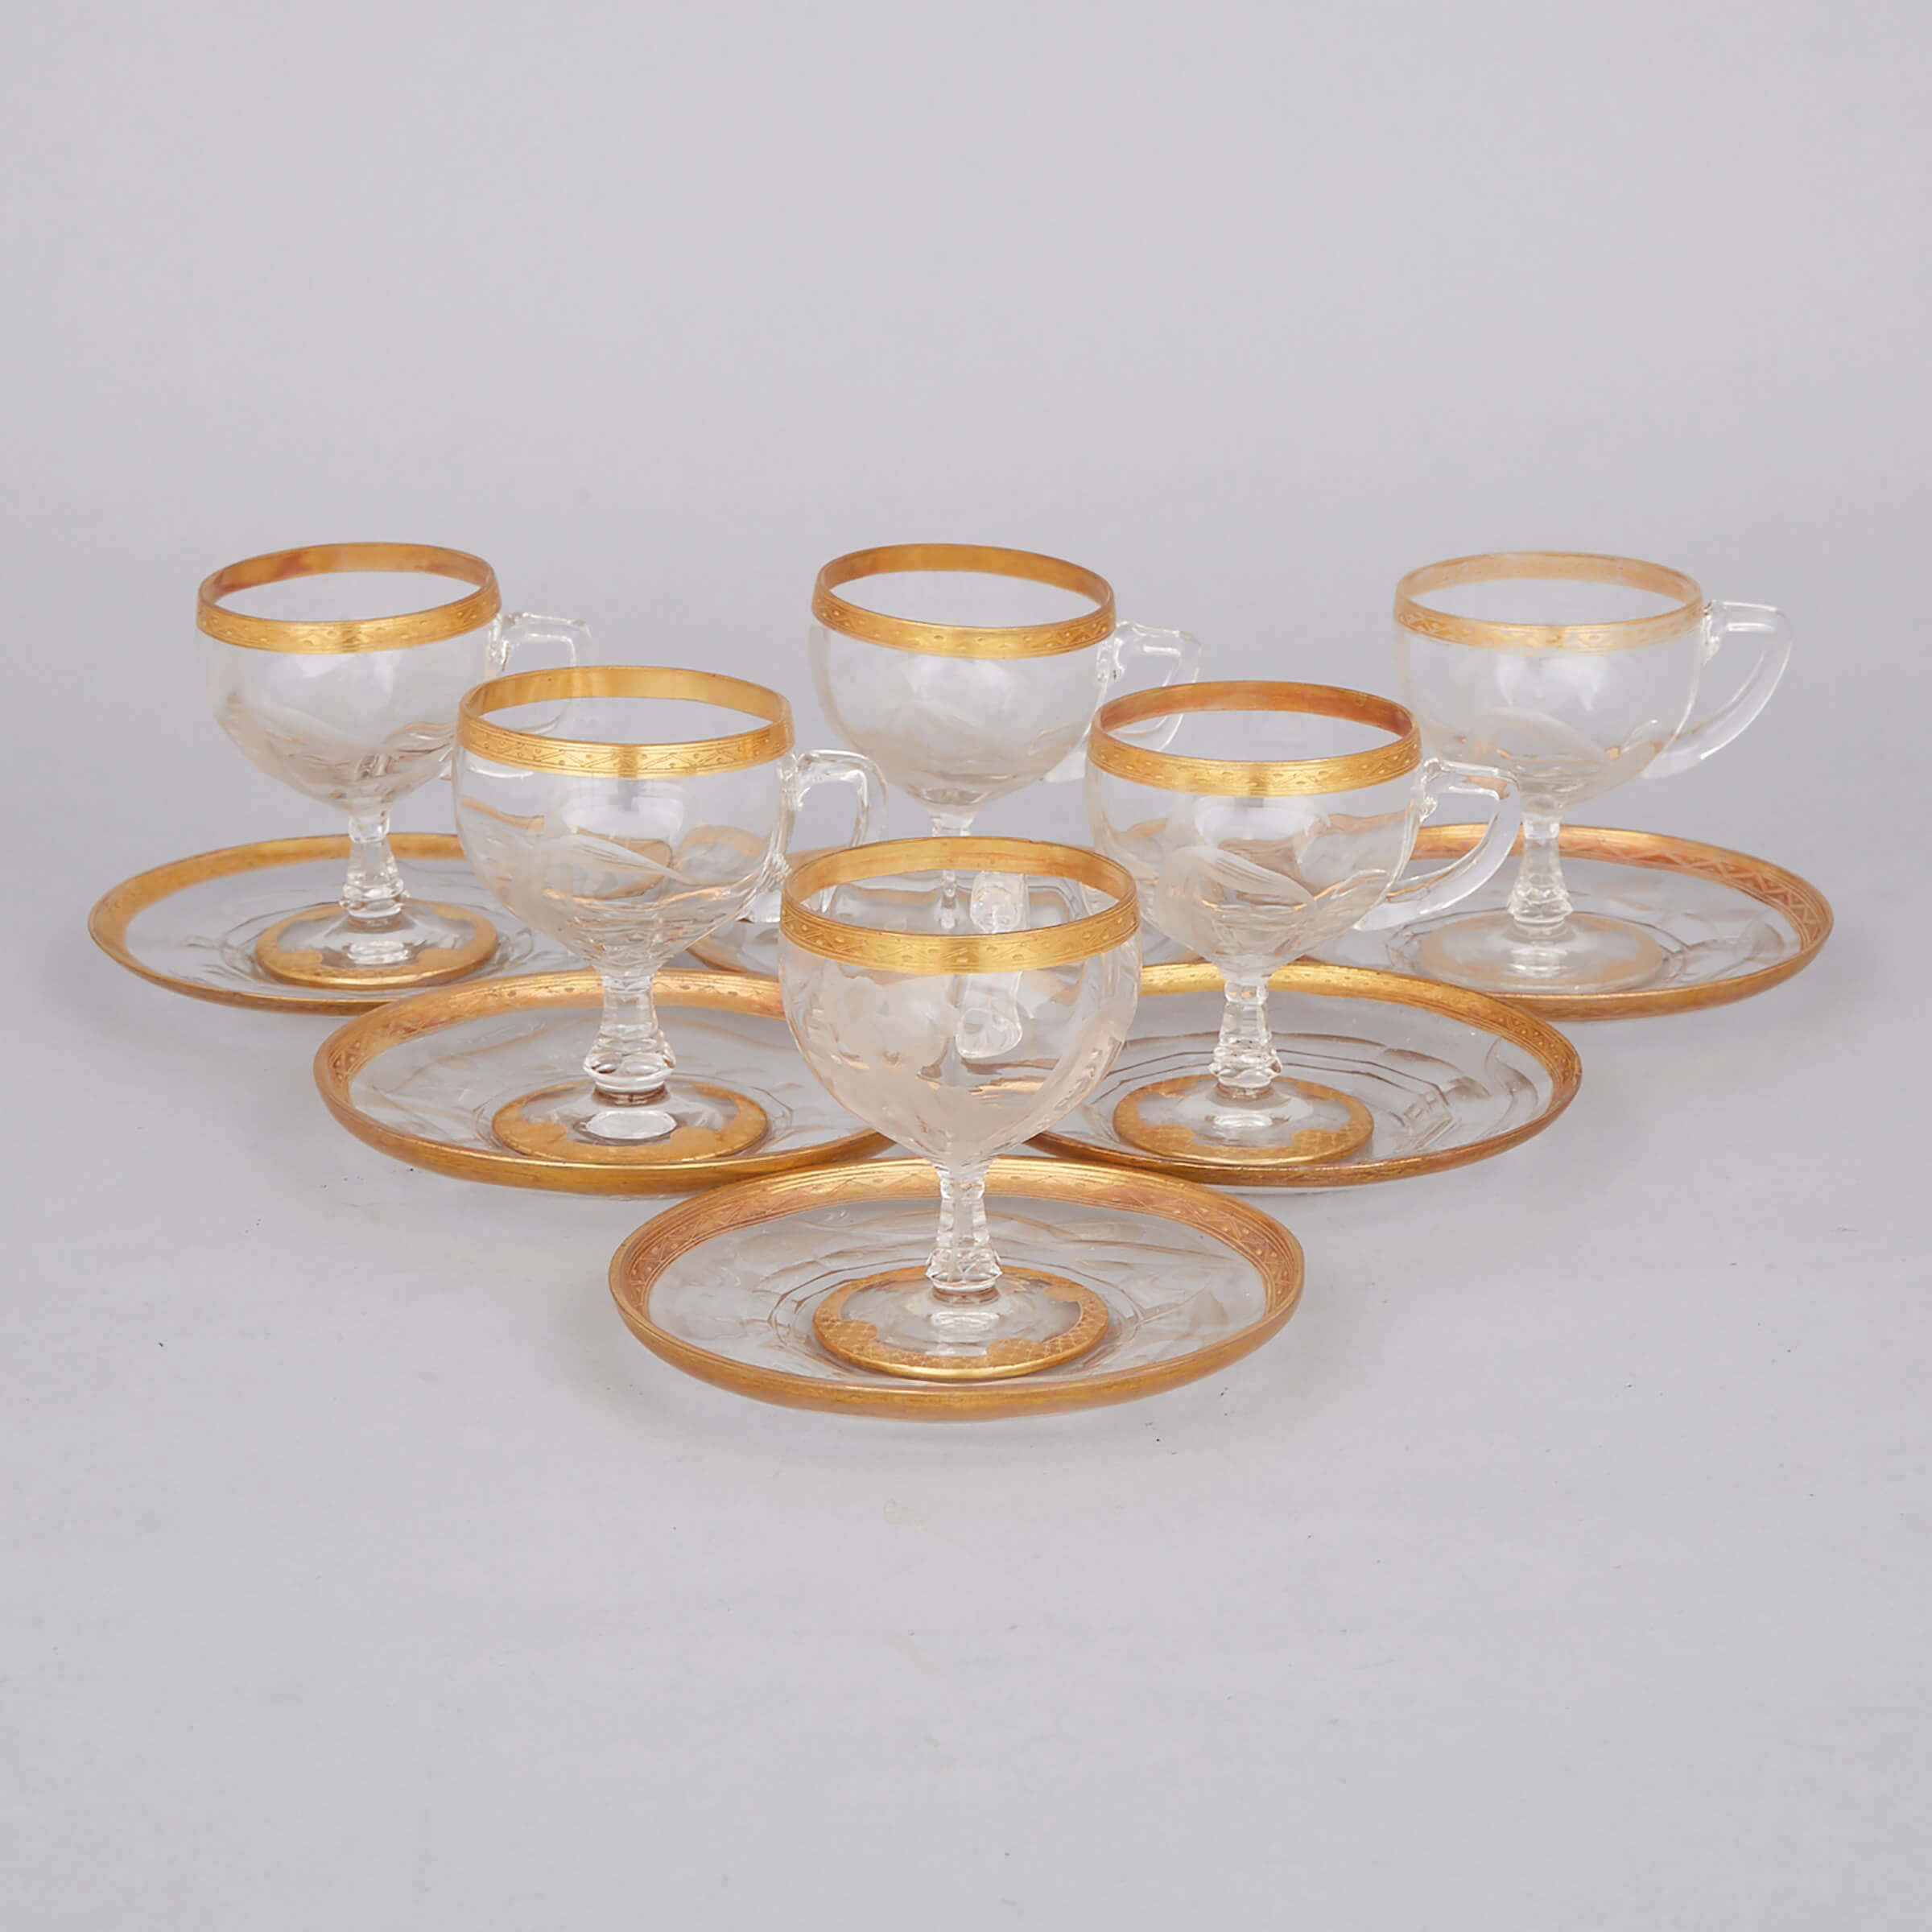 Six Continental Engraved and Gilt Glass Cups with Stands, late 19th century